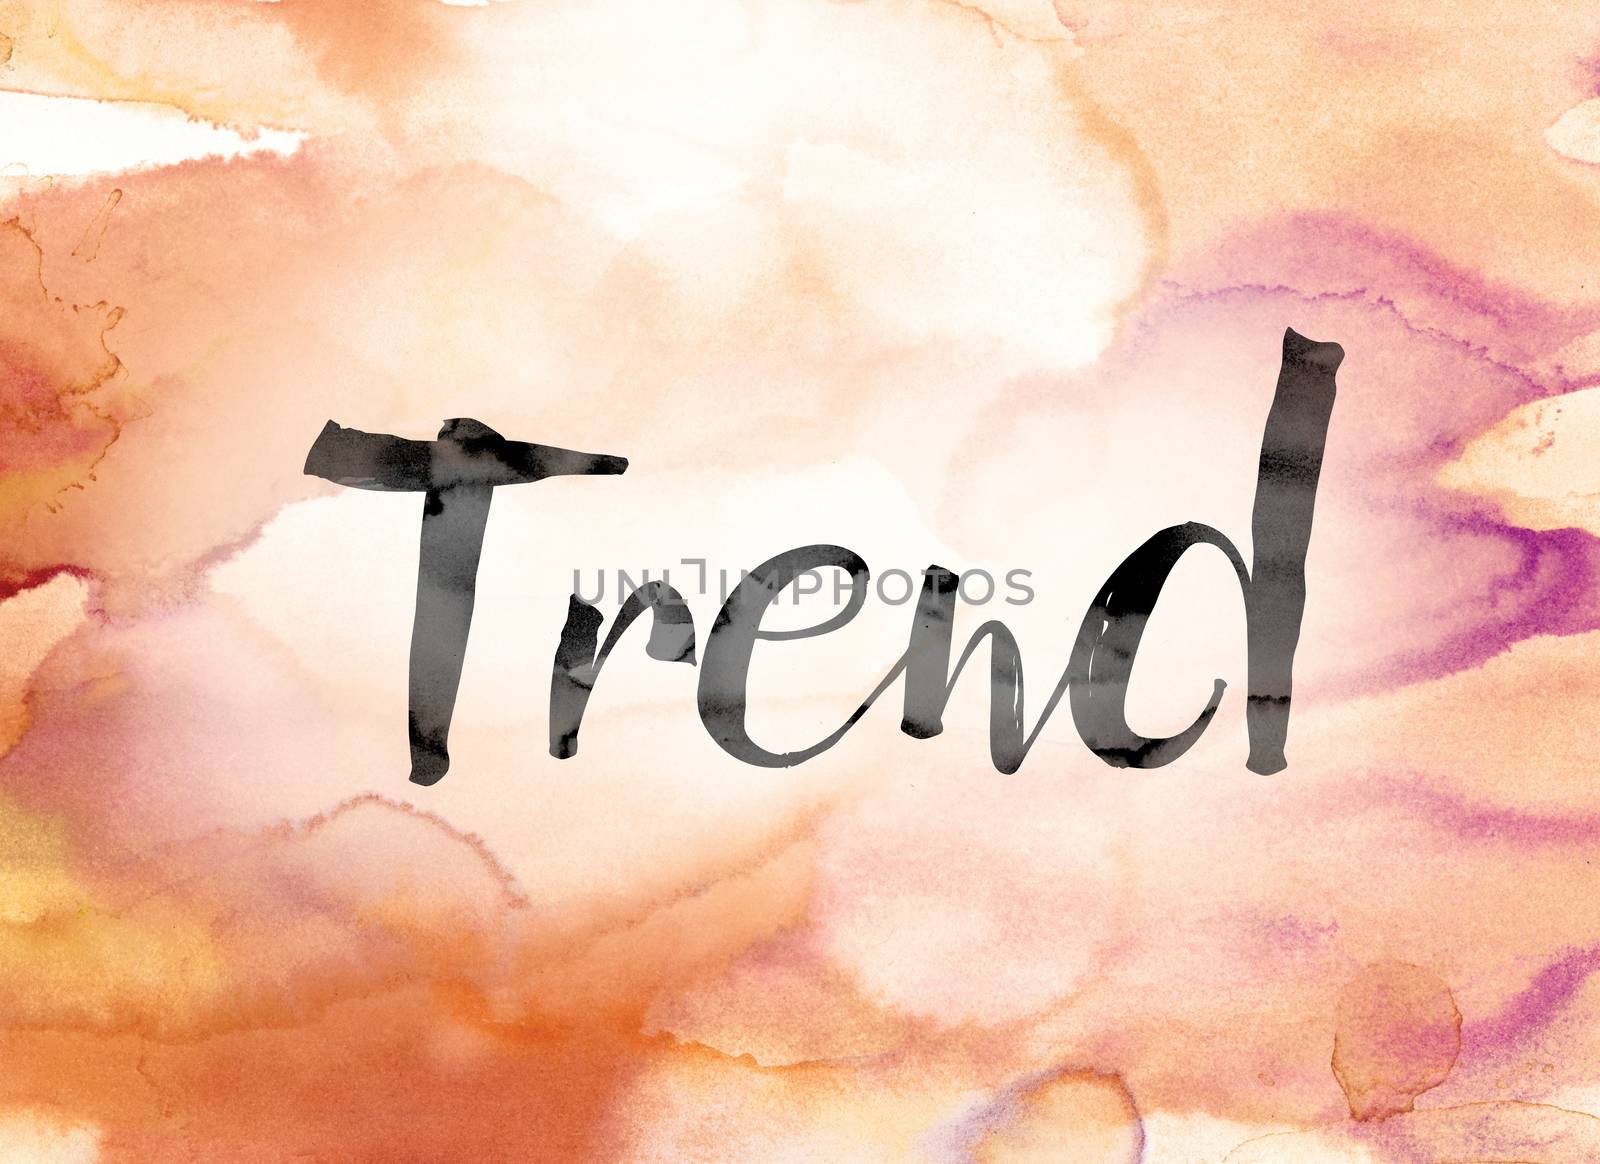 Trend Colorful Watercolor and Ink Word Art by enterlinedesign